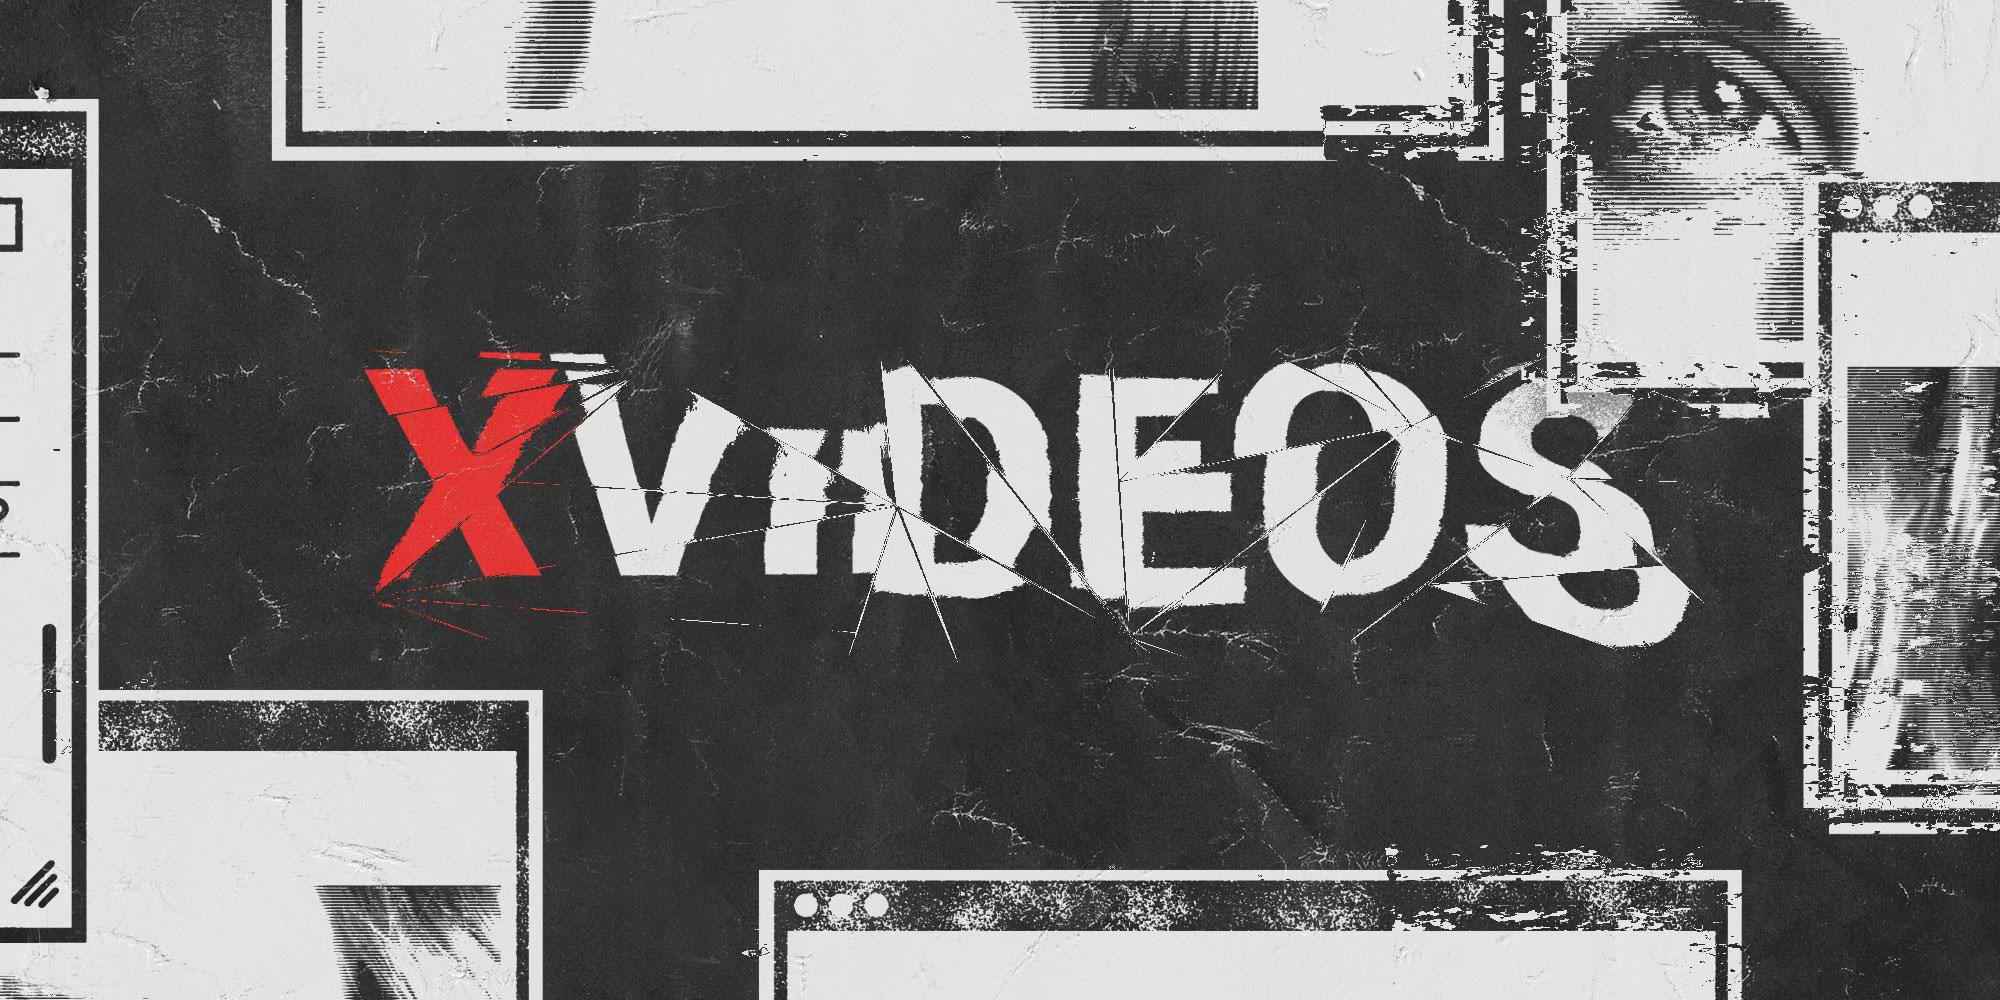 XVideos, Worlds Most Popular Porn Site, Reportedly Hosts Nonconsensual Content and Child Exploitation pic